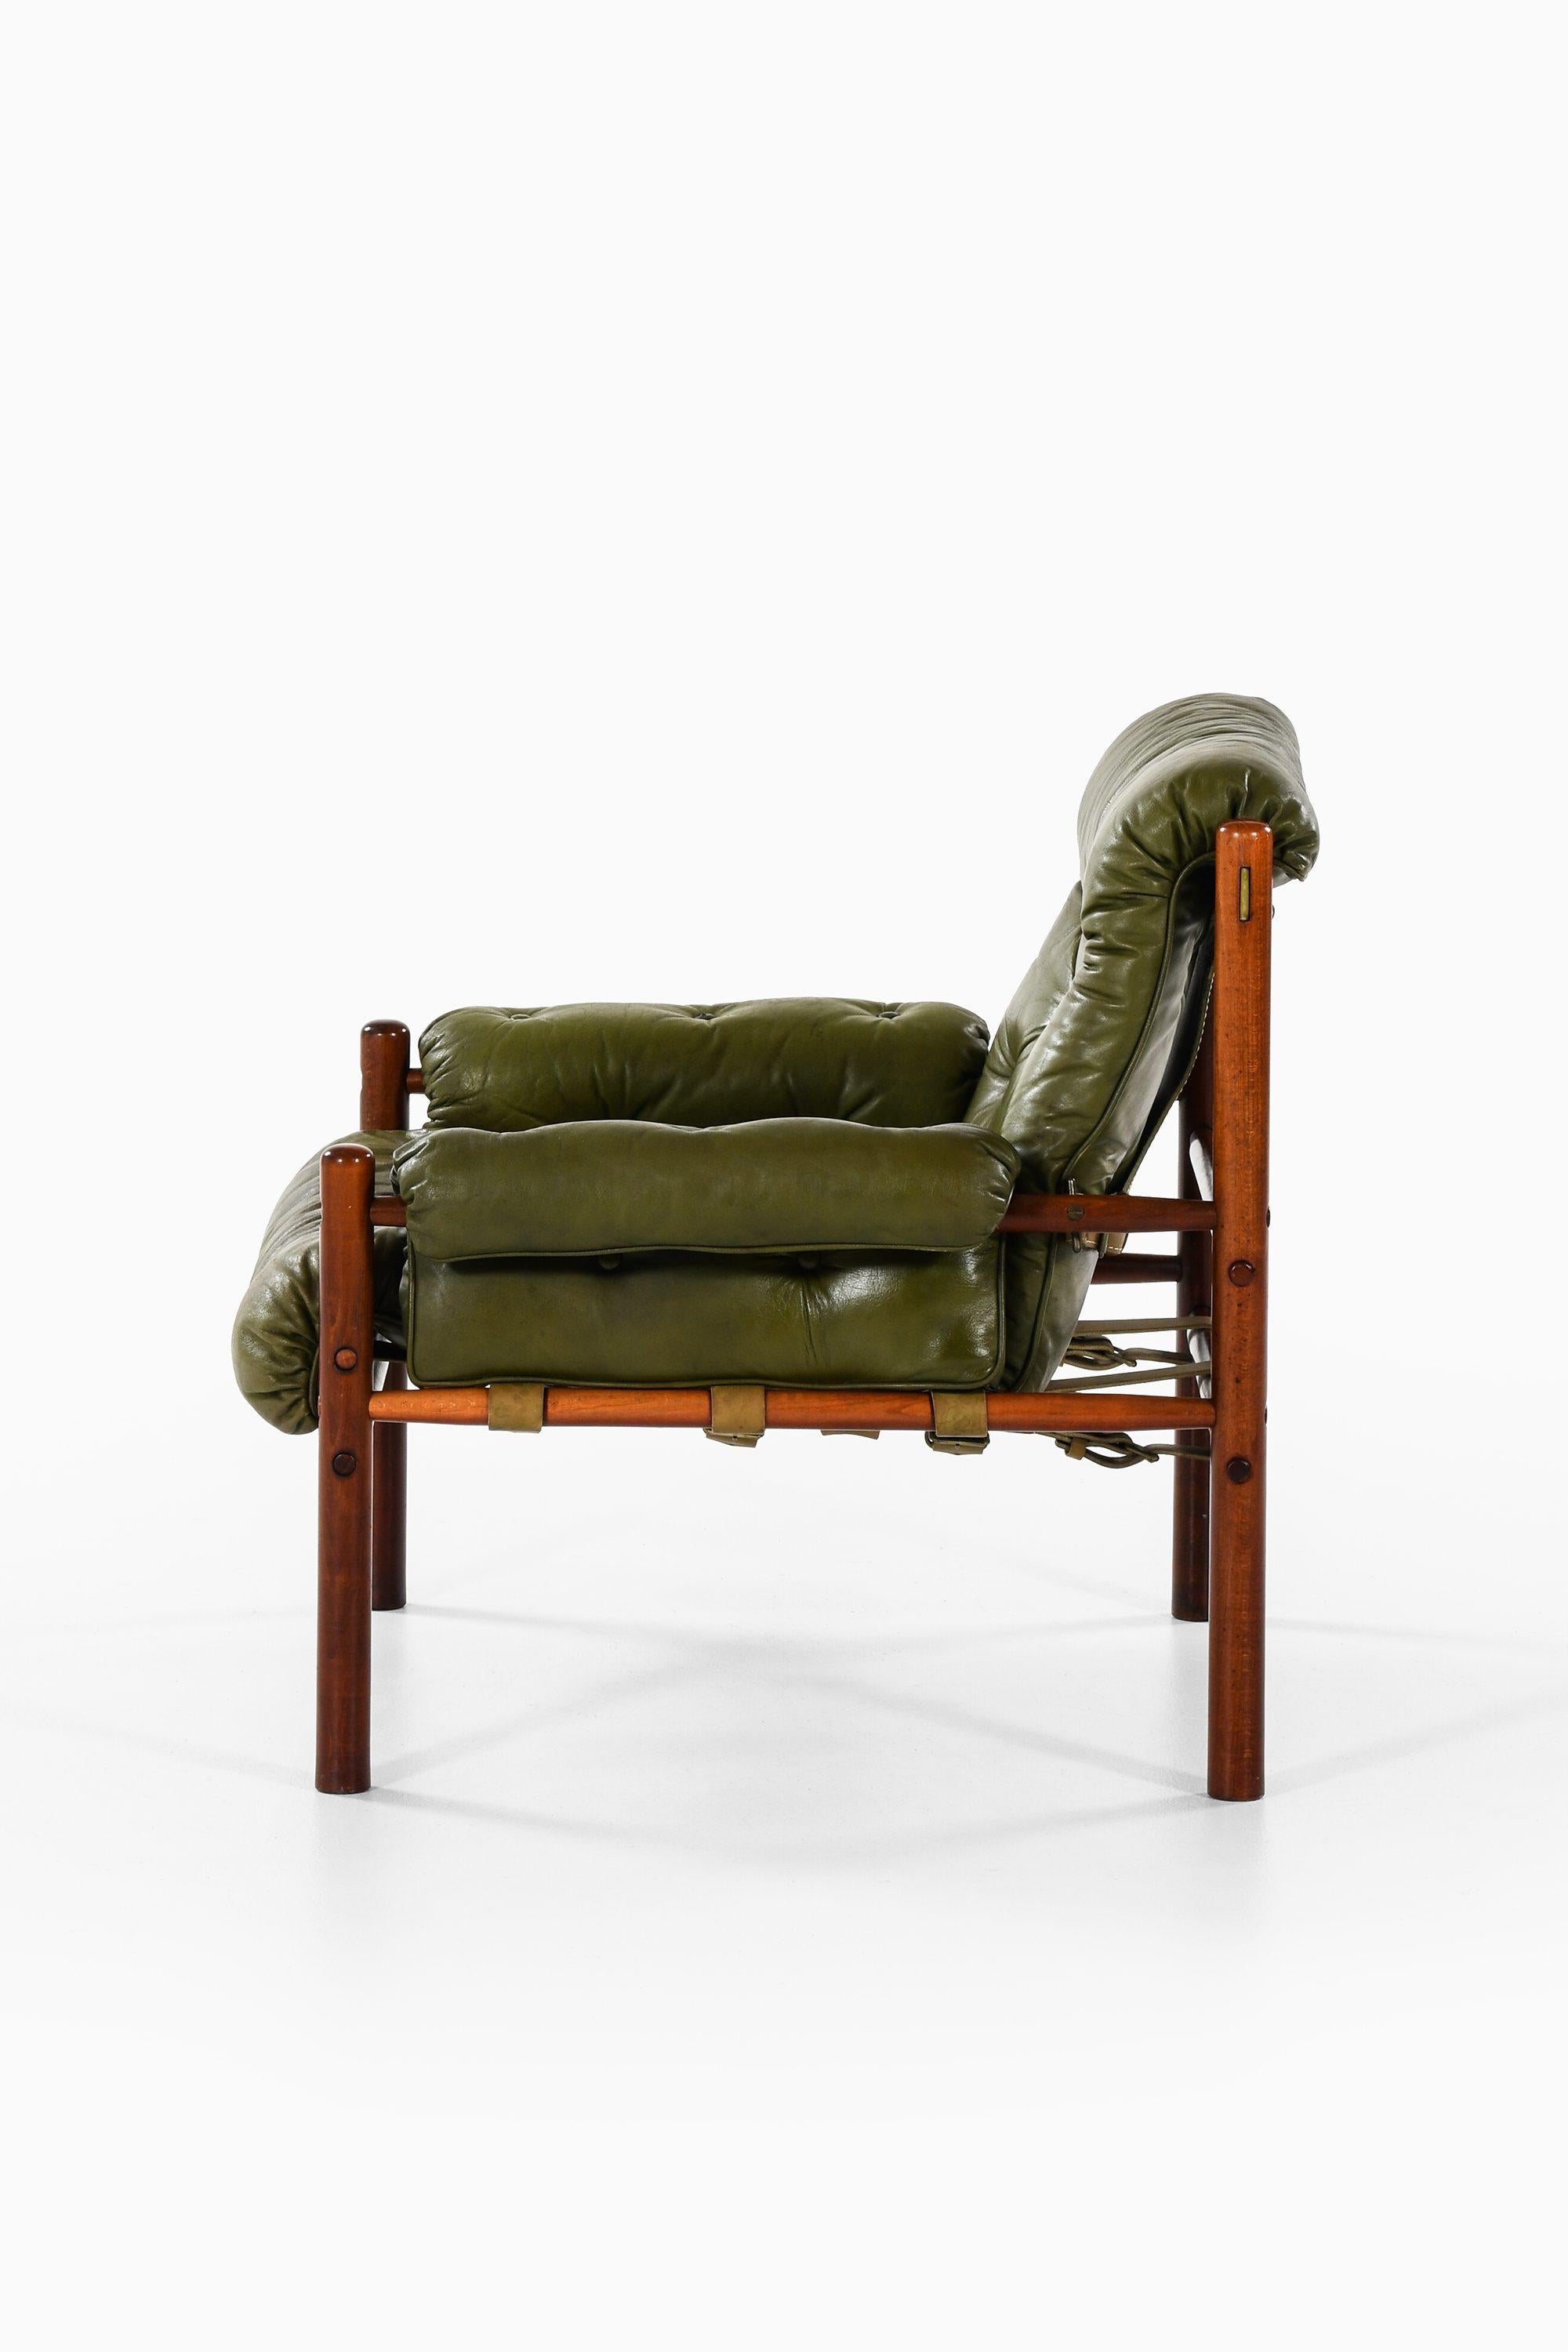 Easy Chair in Beech and Leather by Arne Norell, 1960s

Additional Information:
Material: Dark stained beech, original green leather and brass
Style: midcentury, Scandinavian
Produced by Arne Norell AB in Aneby, Sweden
Dimensions (W x D x H):